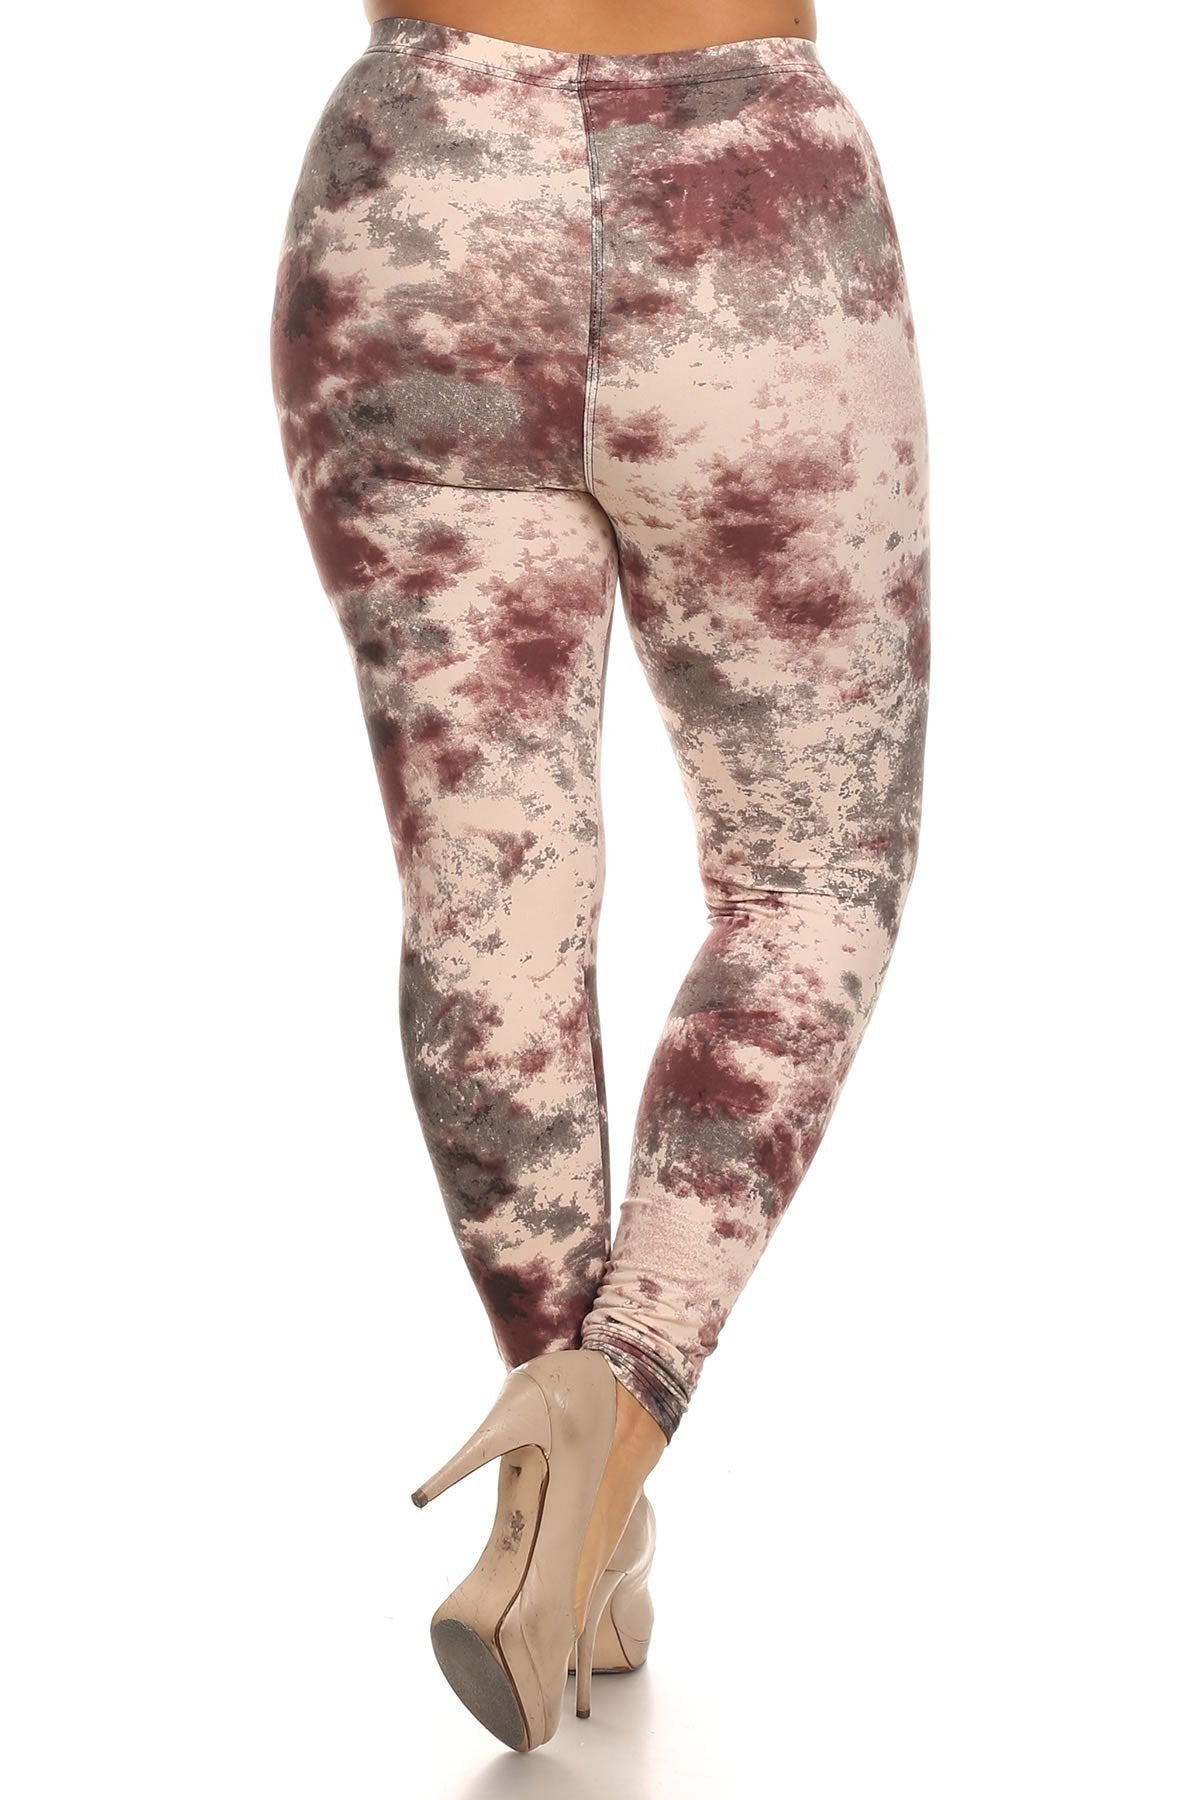 Plus Tie Dye Print, Full Length Leggings In A Fitted Style With A Banded High Waist